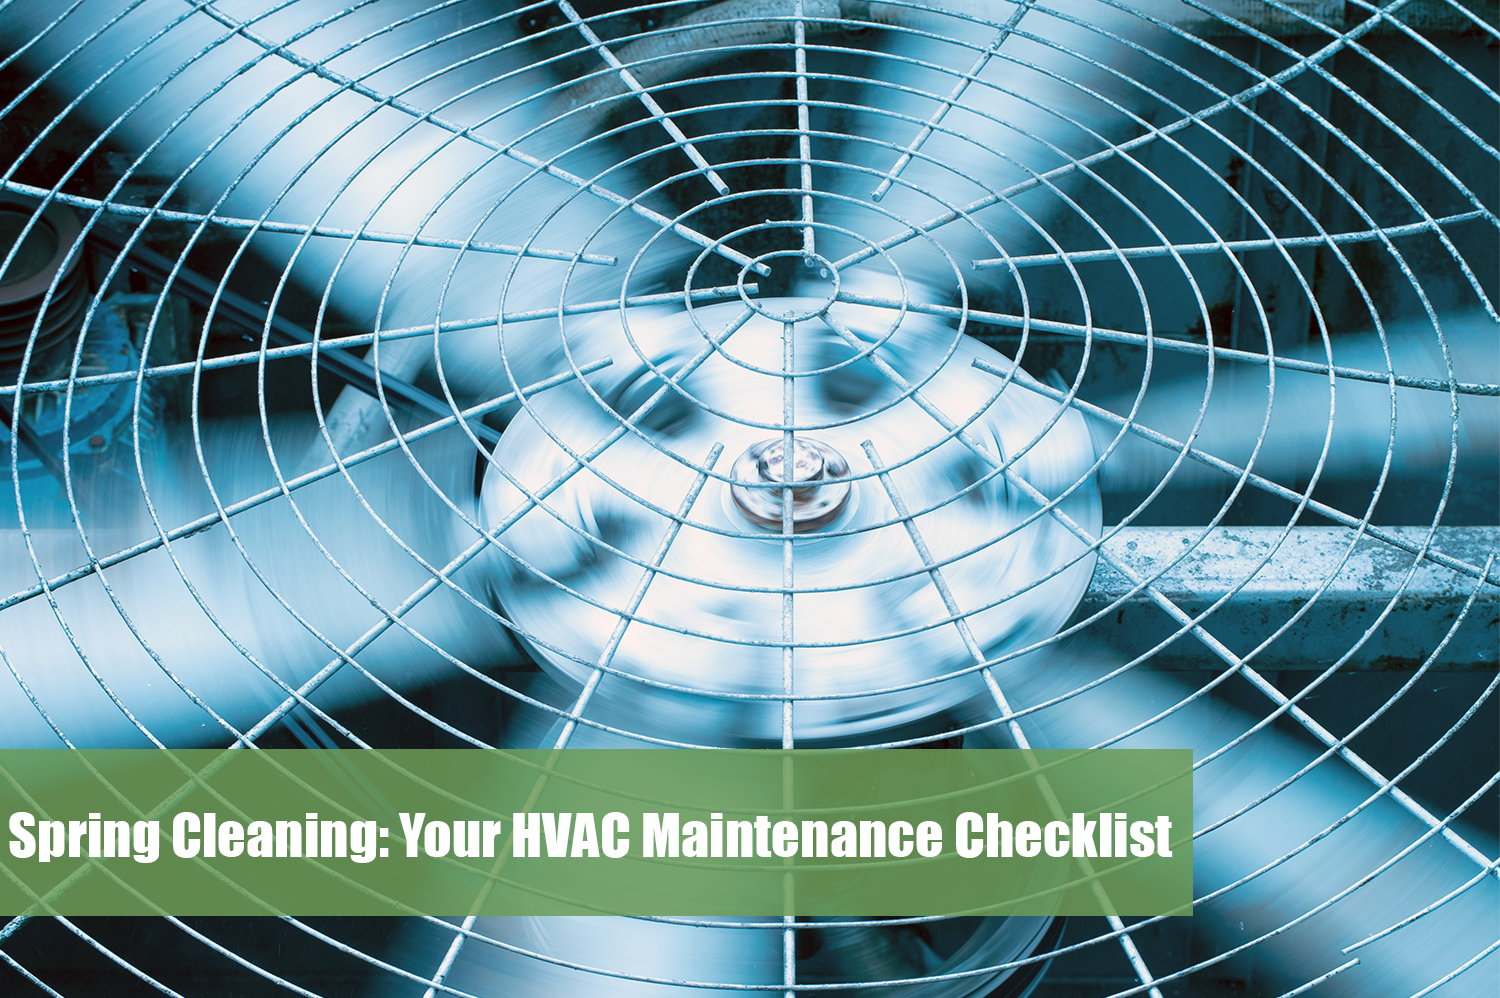 HVAC fans close up, something that should be on your HVAC maintenance checklist.